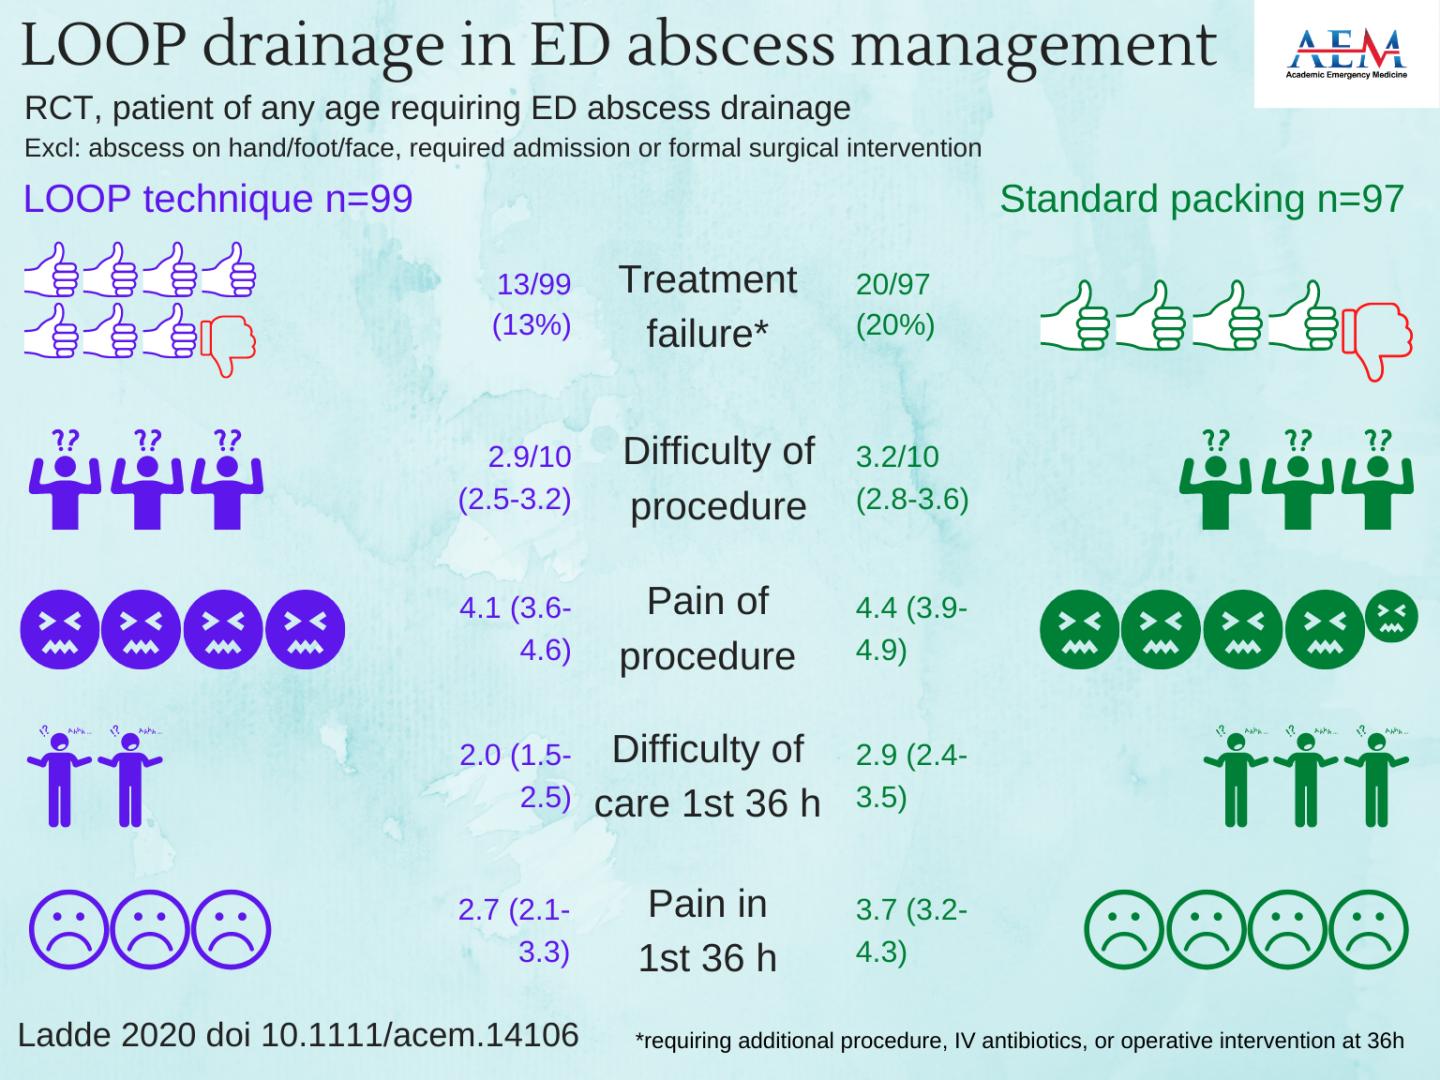 LOOP DRAINAGE IN EMERGENCY DEPARTMENT ABSCESS MANAGEMENT